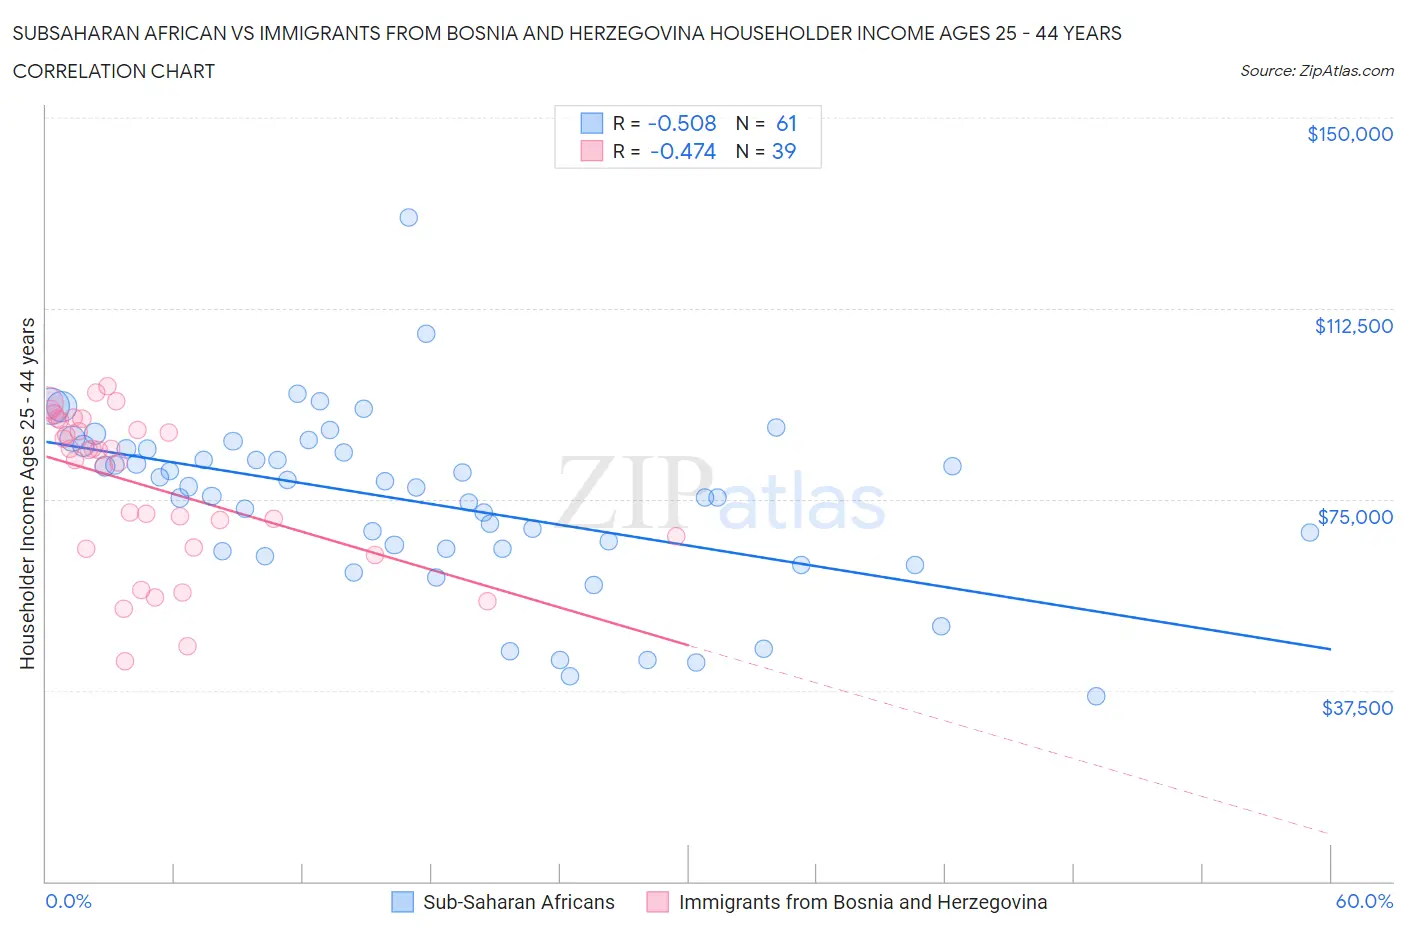 Subsaharan African vs Immigrants from Bosnia and Herzegovina Householder Income Ages 25 - 44 years